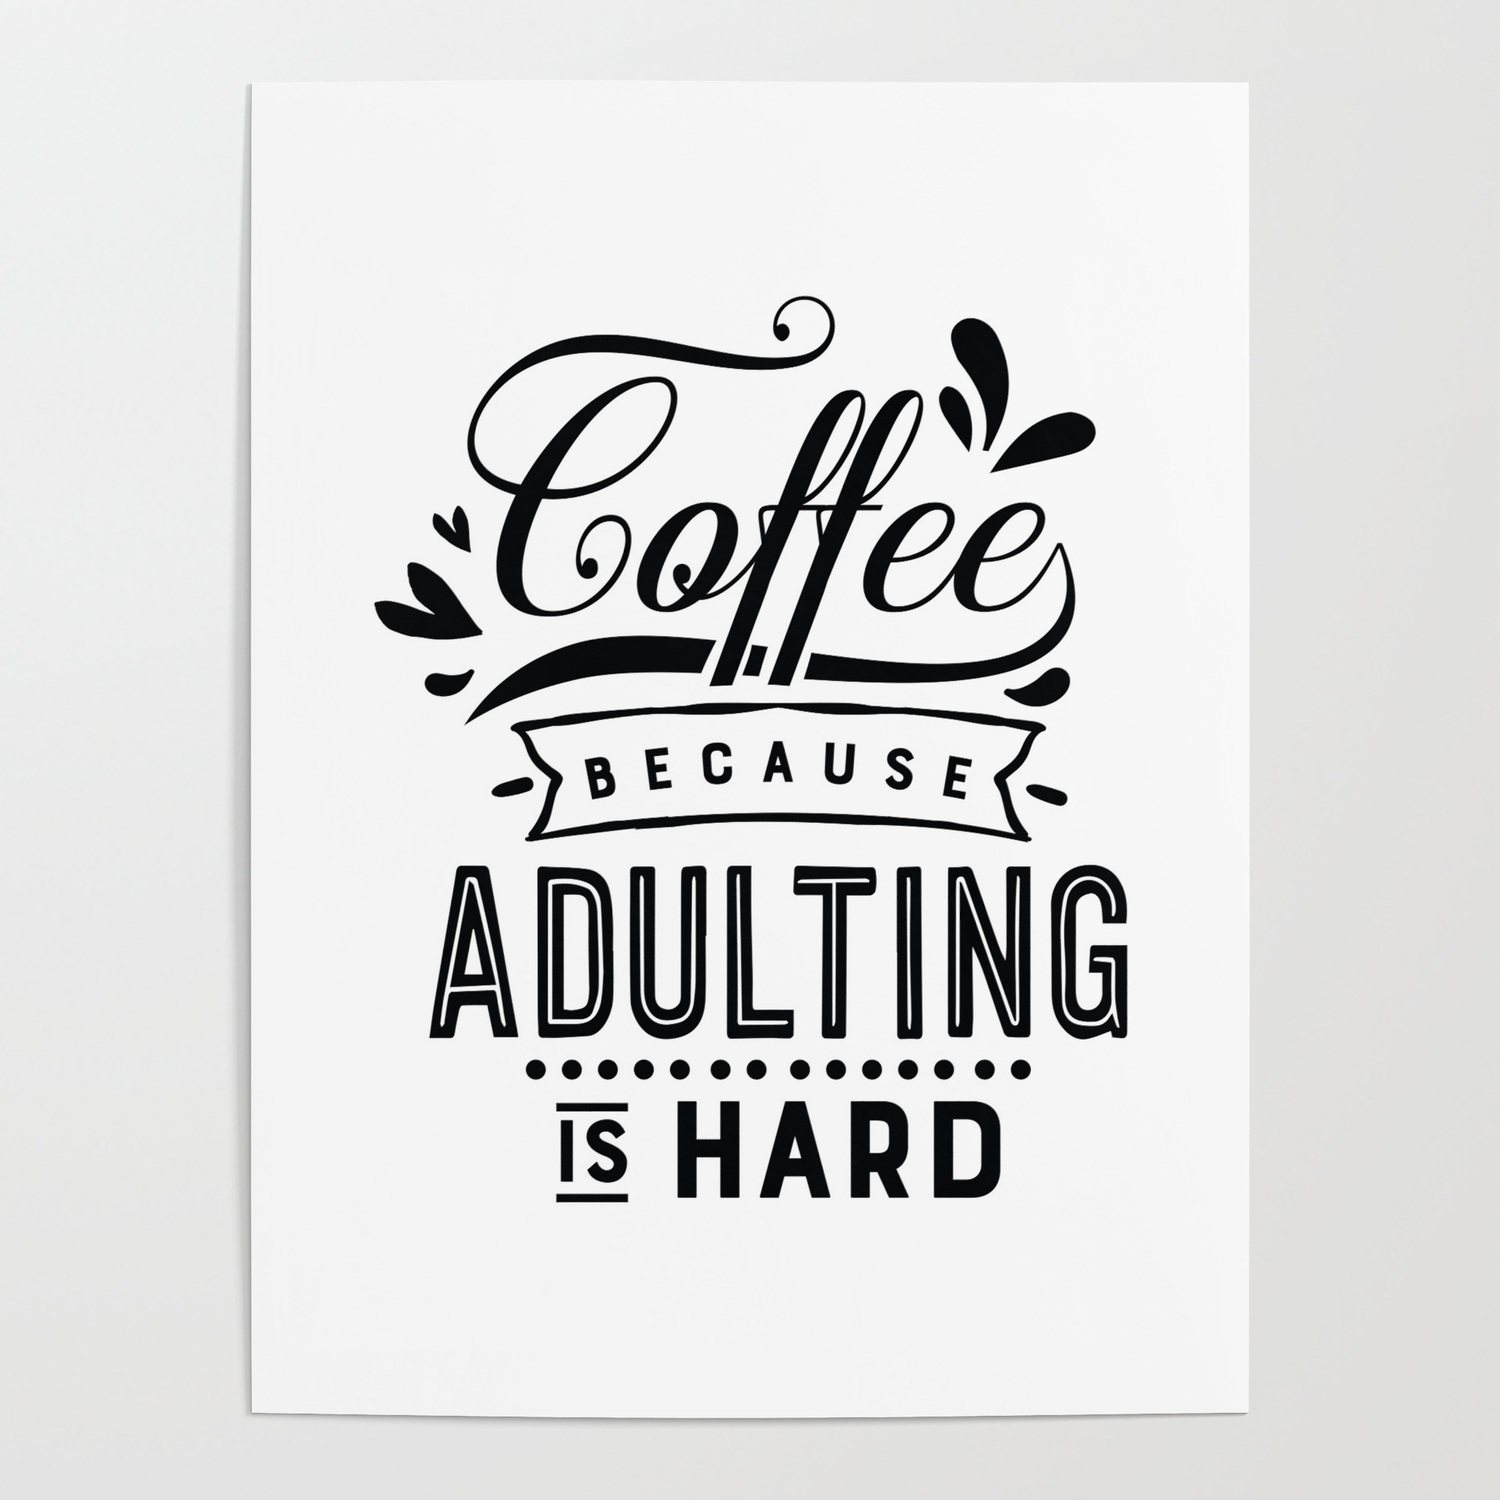 Coffee because adulting is hard - Funny hand drawn quotes illustration.  Funny humor. Life sayings. Poster by The Life Quotes | Society6